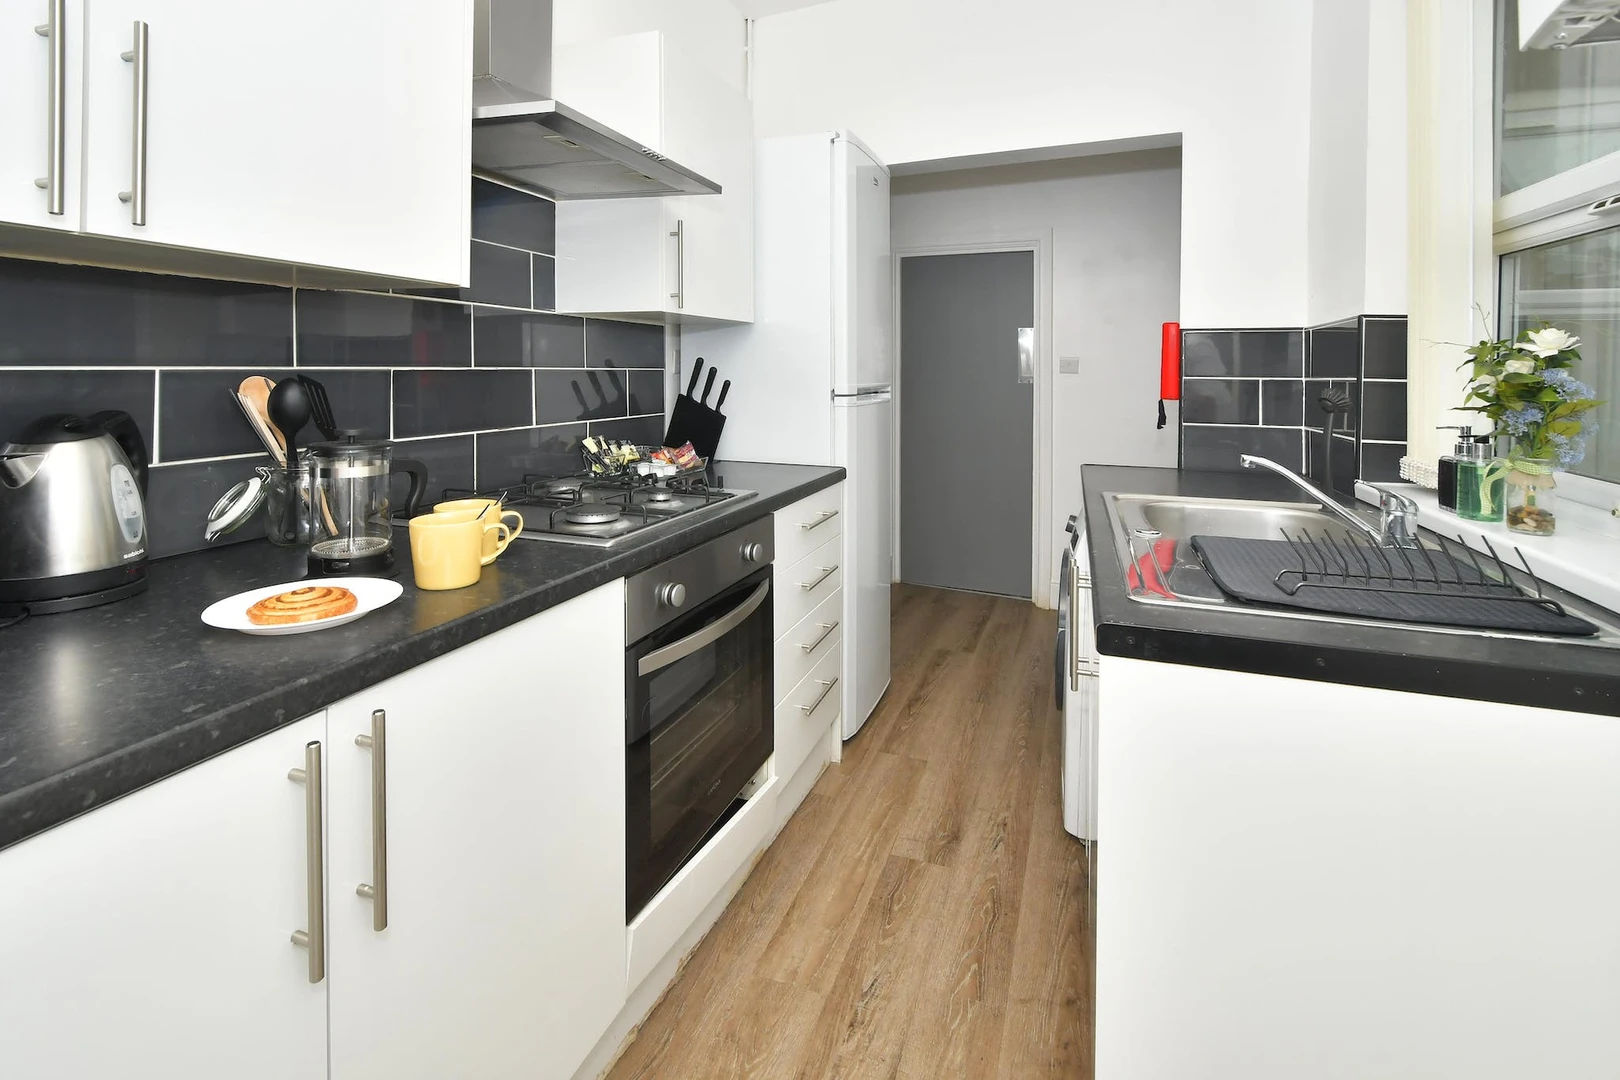 Modern and bright flat in Stoke-on-trent